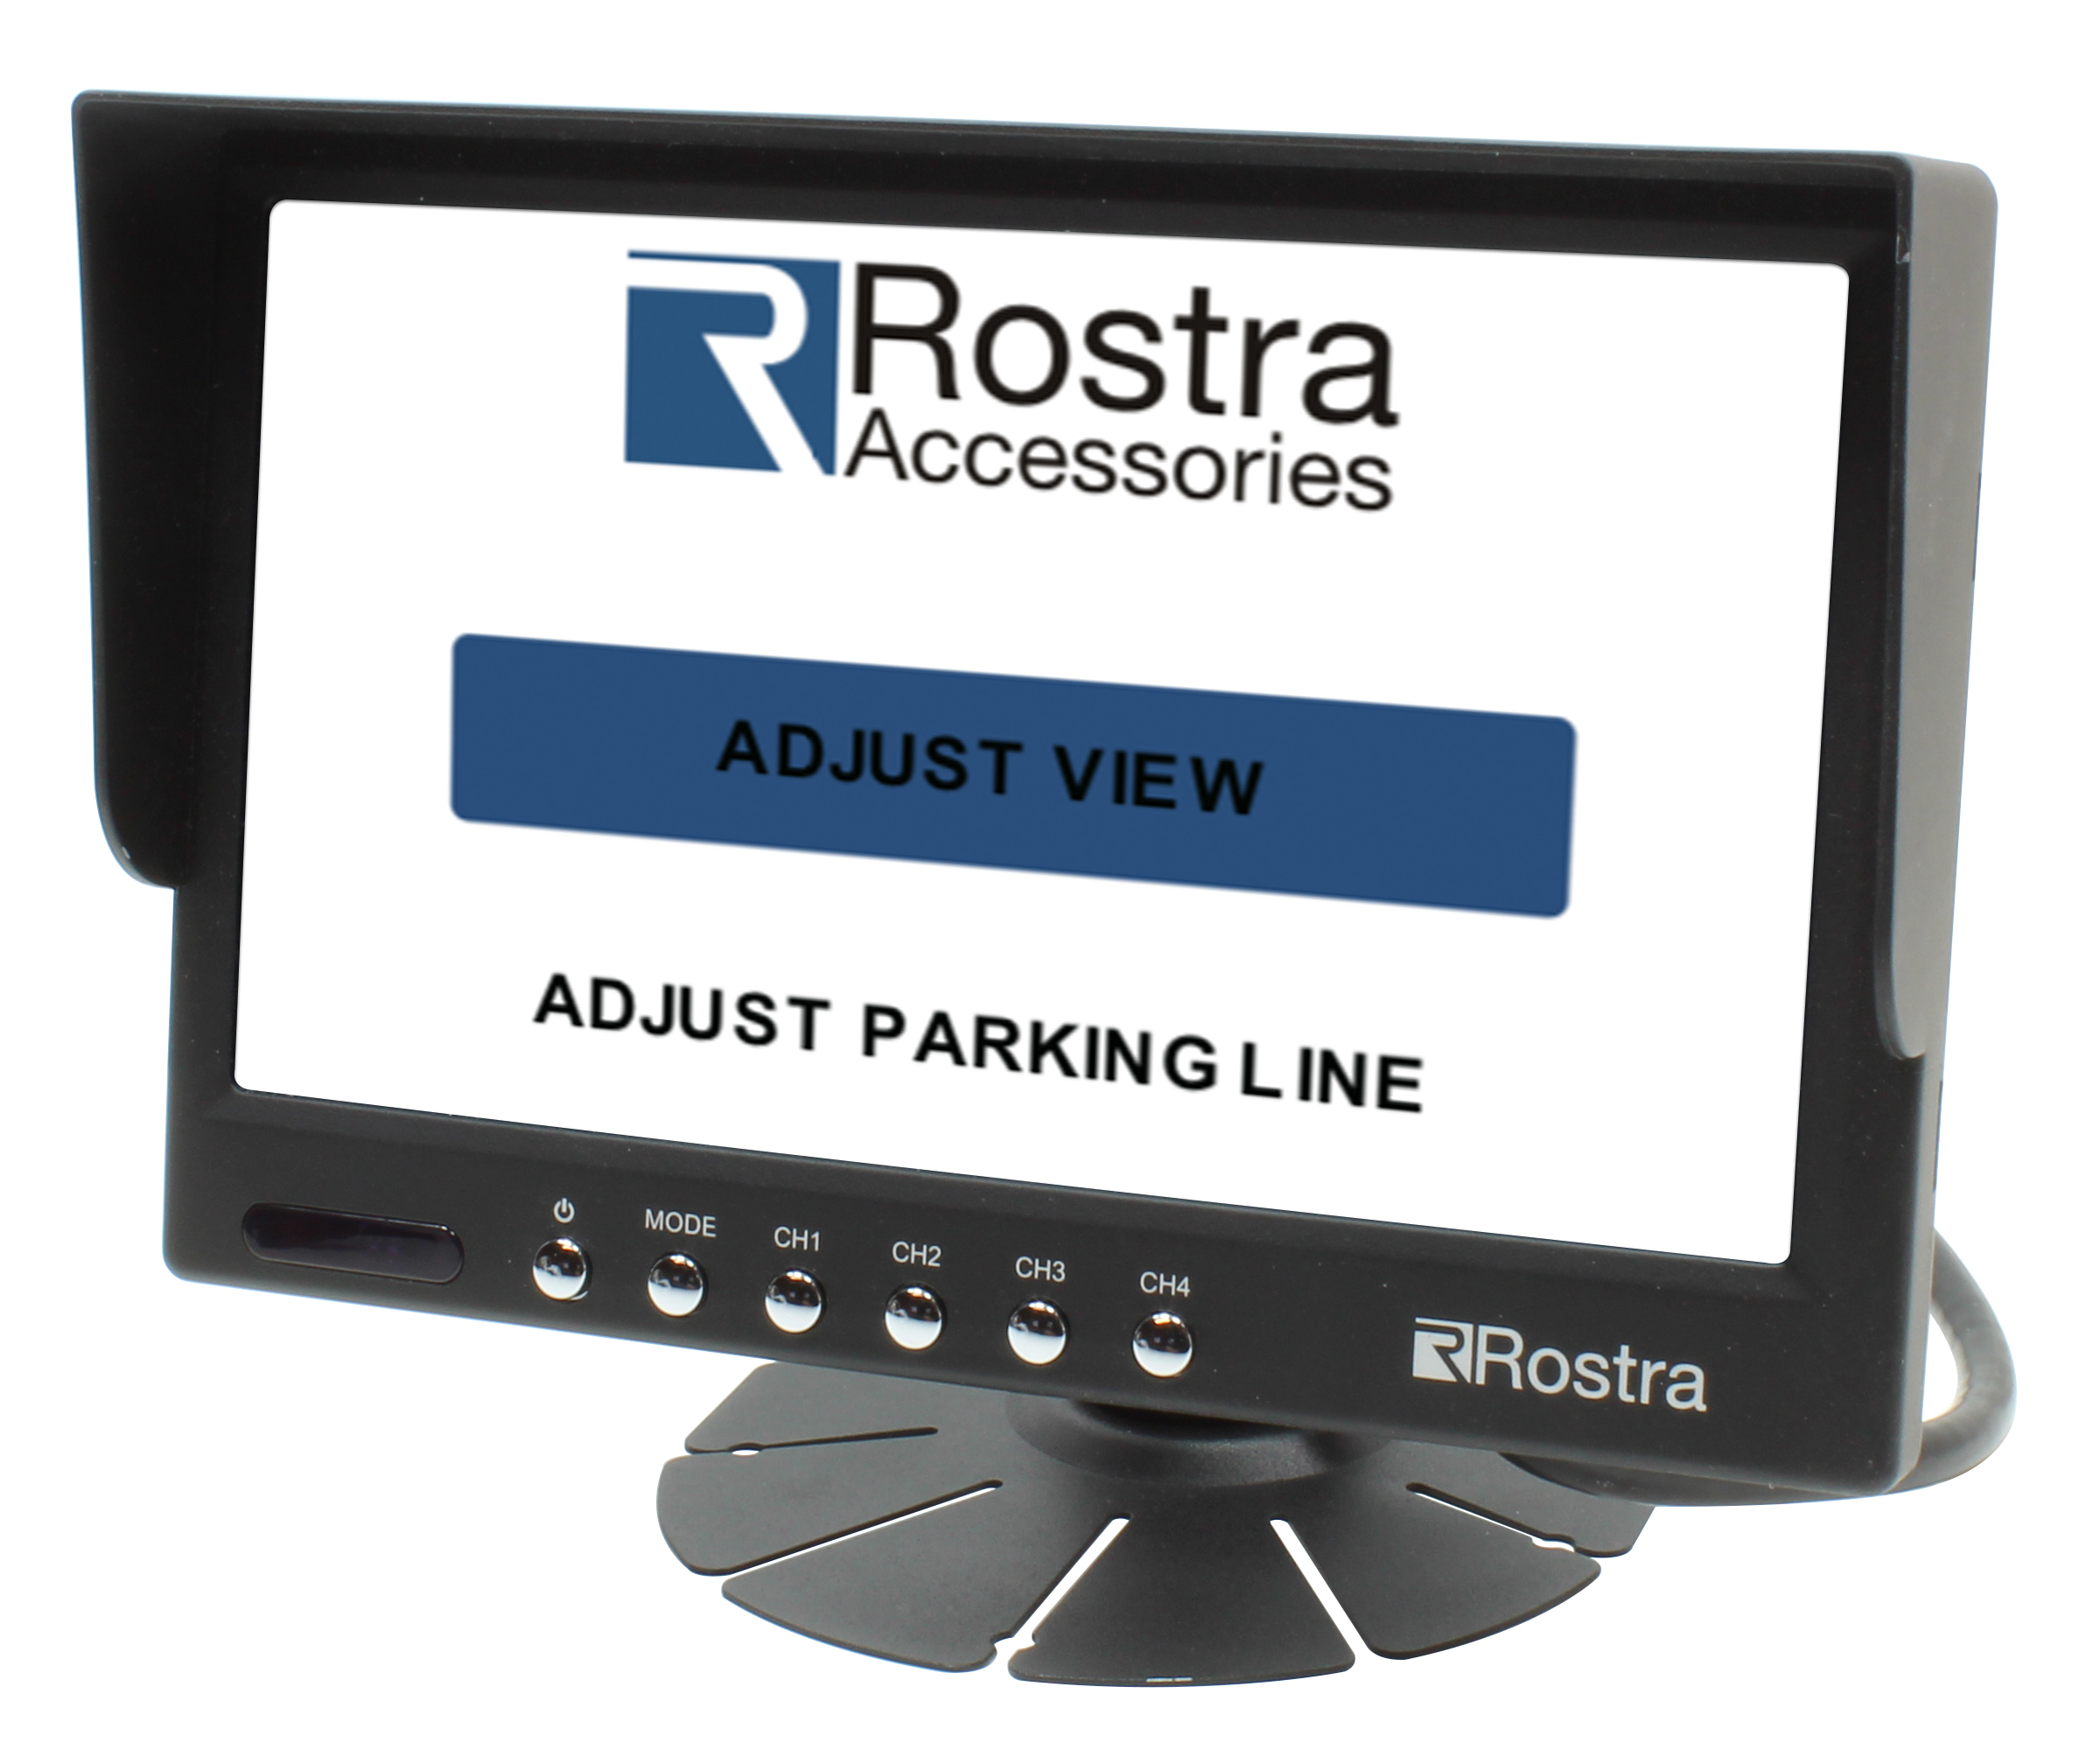 Adjustable parking guidelines can be updated as needed to match the height and width of the vehicle